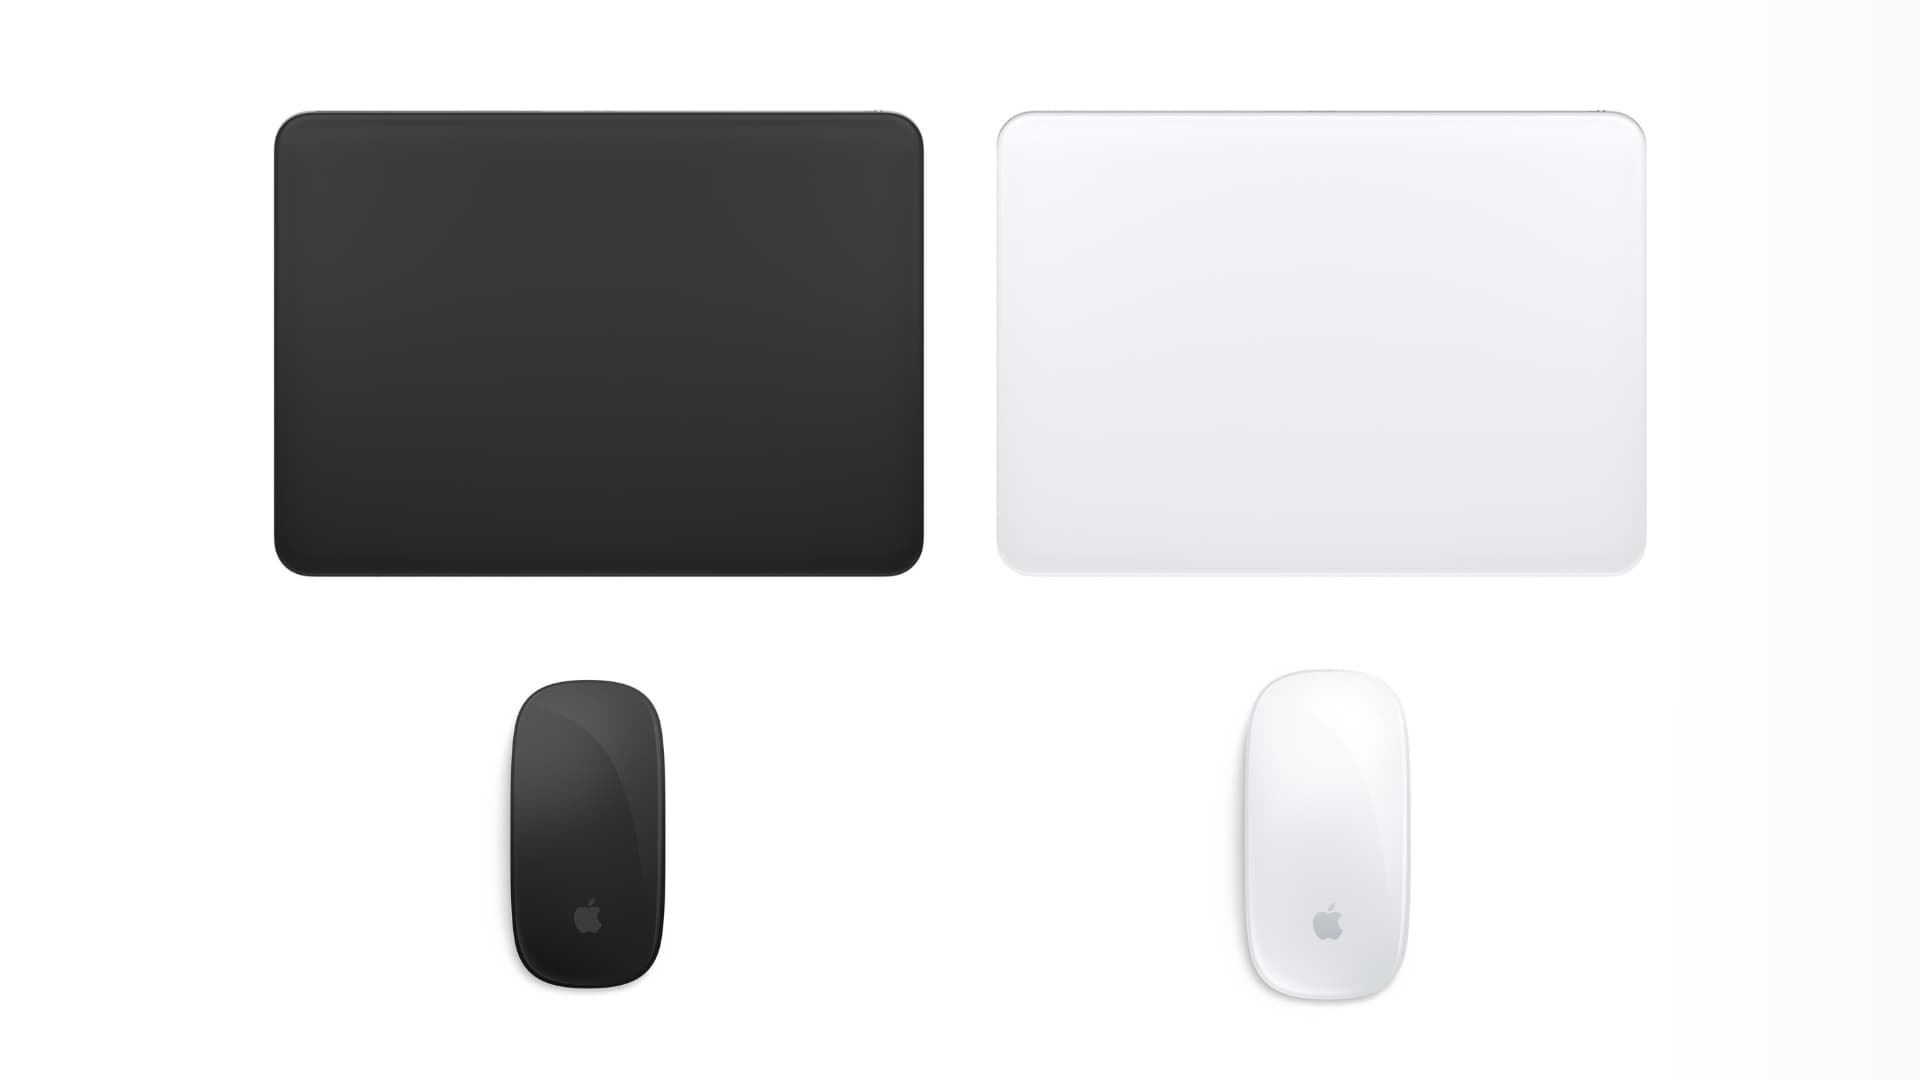 Magic Mouse and Magic Trackpad in both black and white colors